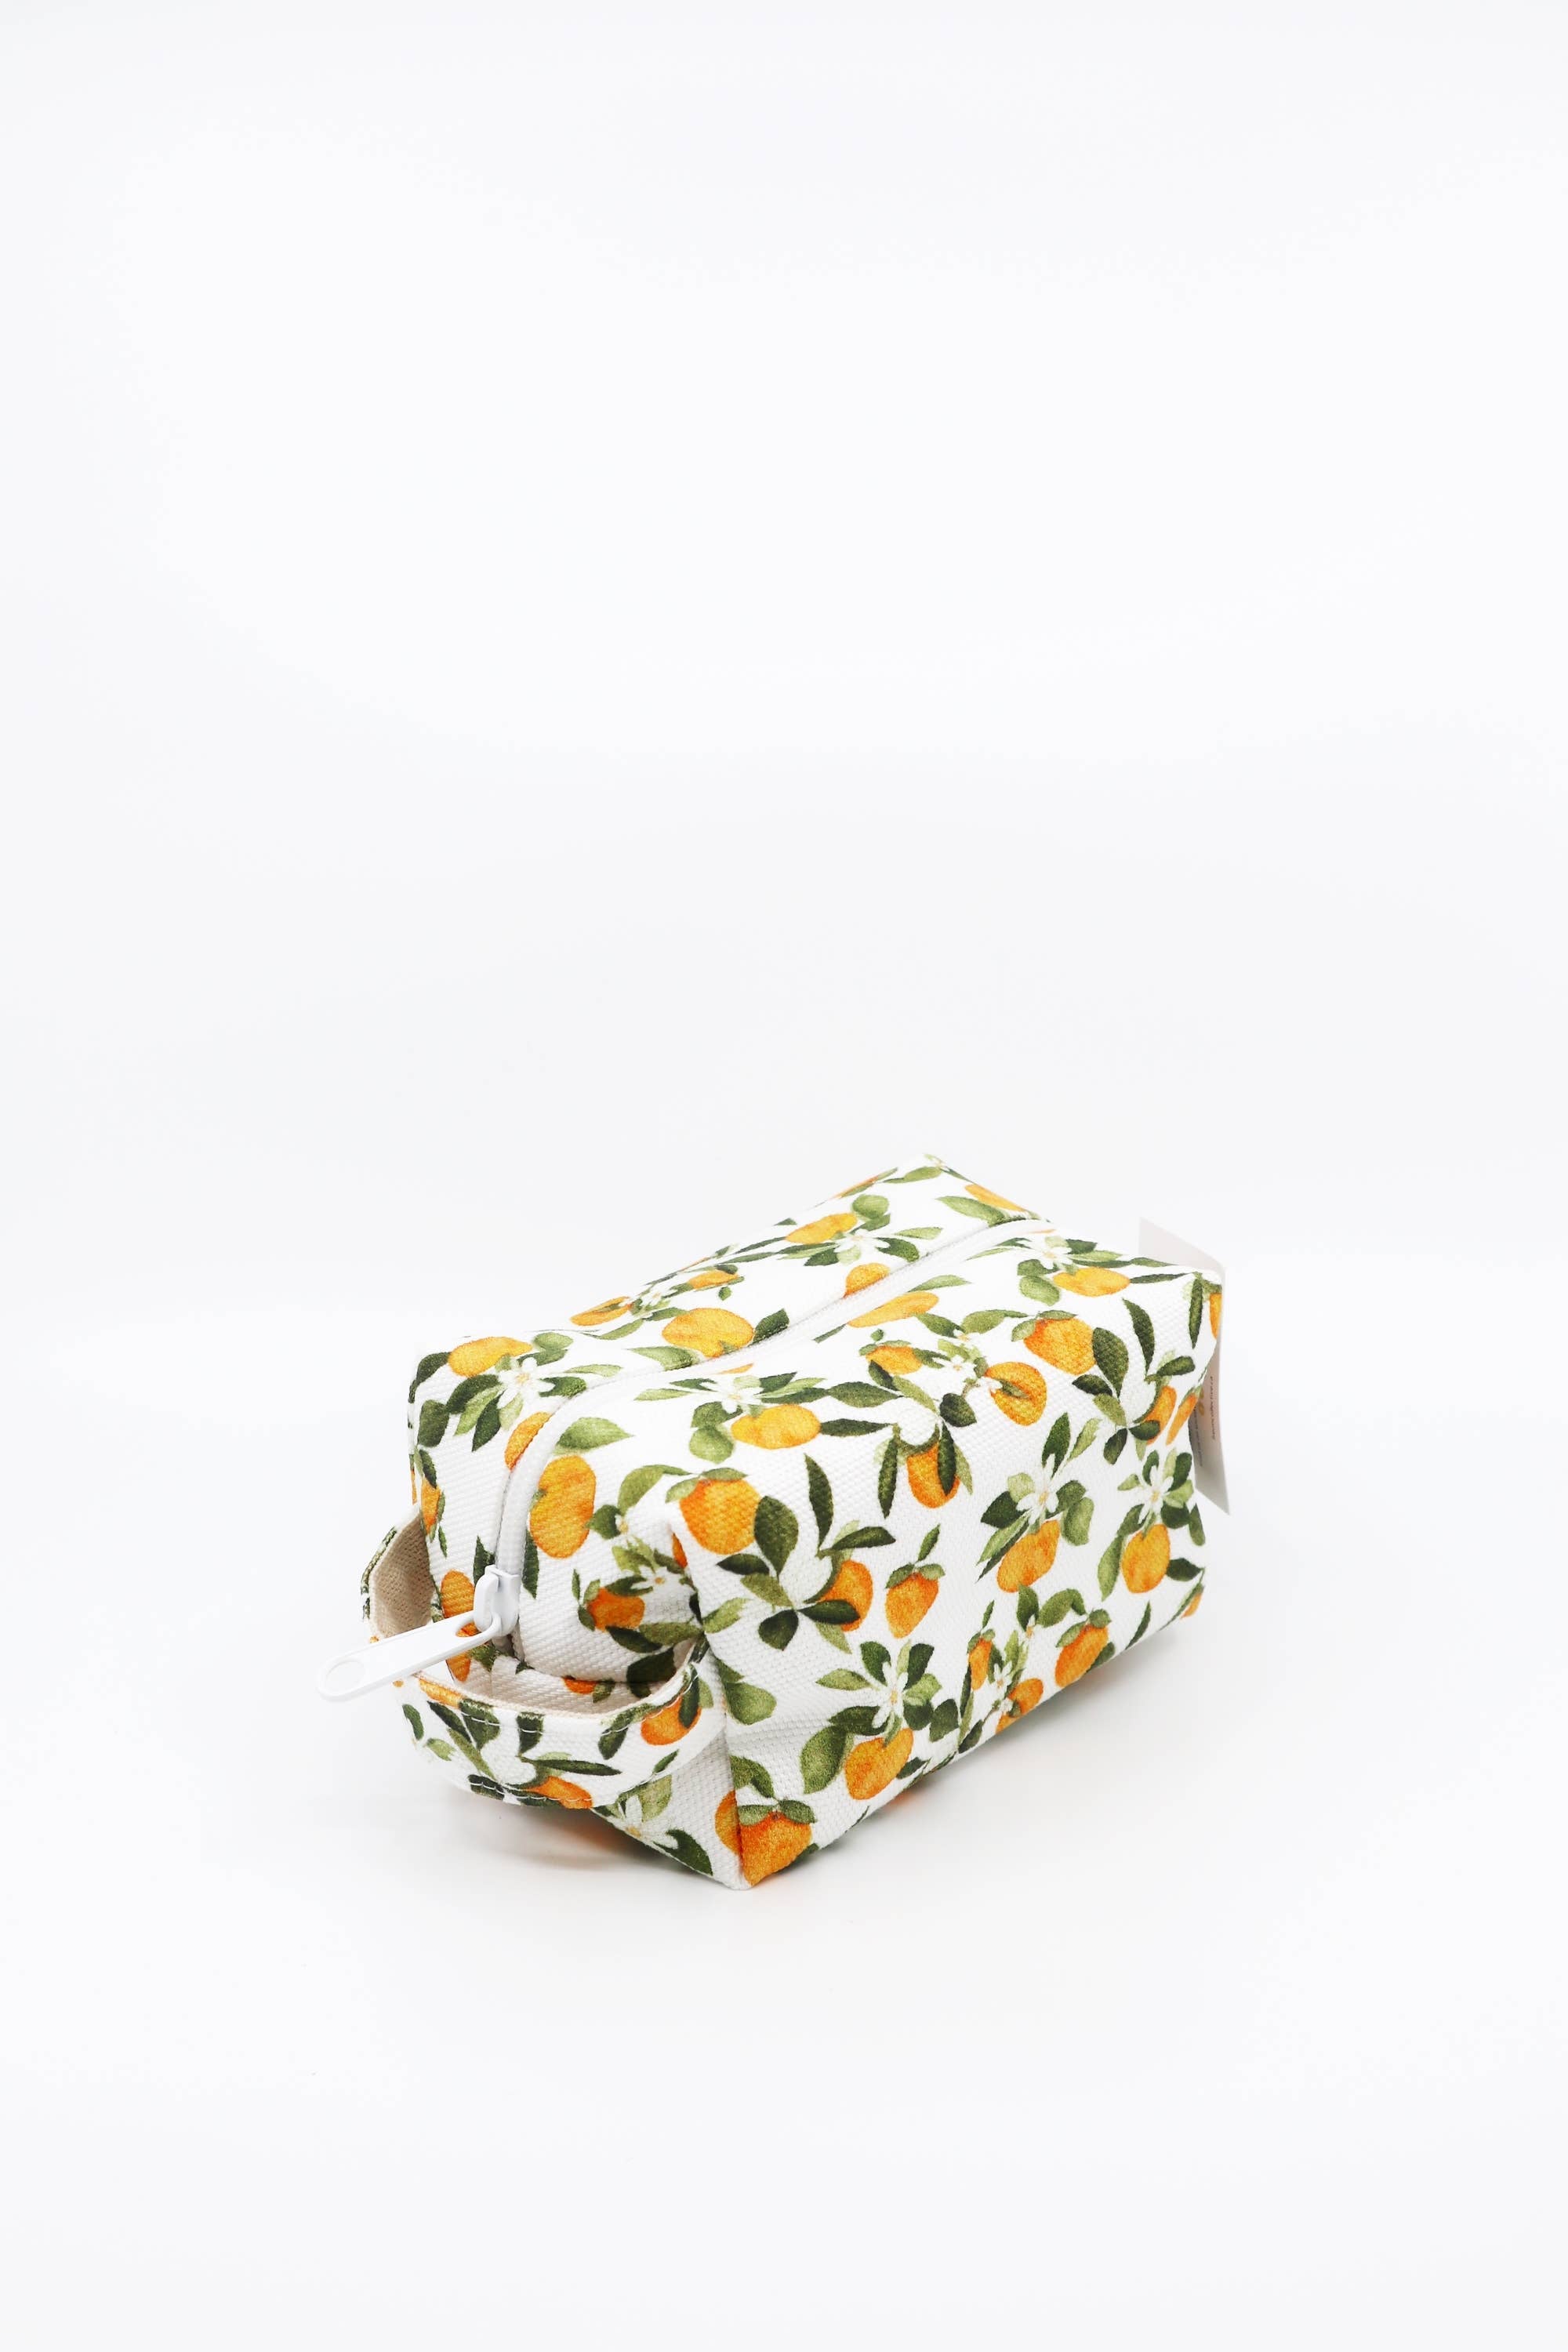 Freon Collective - Mini Makeup Bag - Clementine